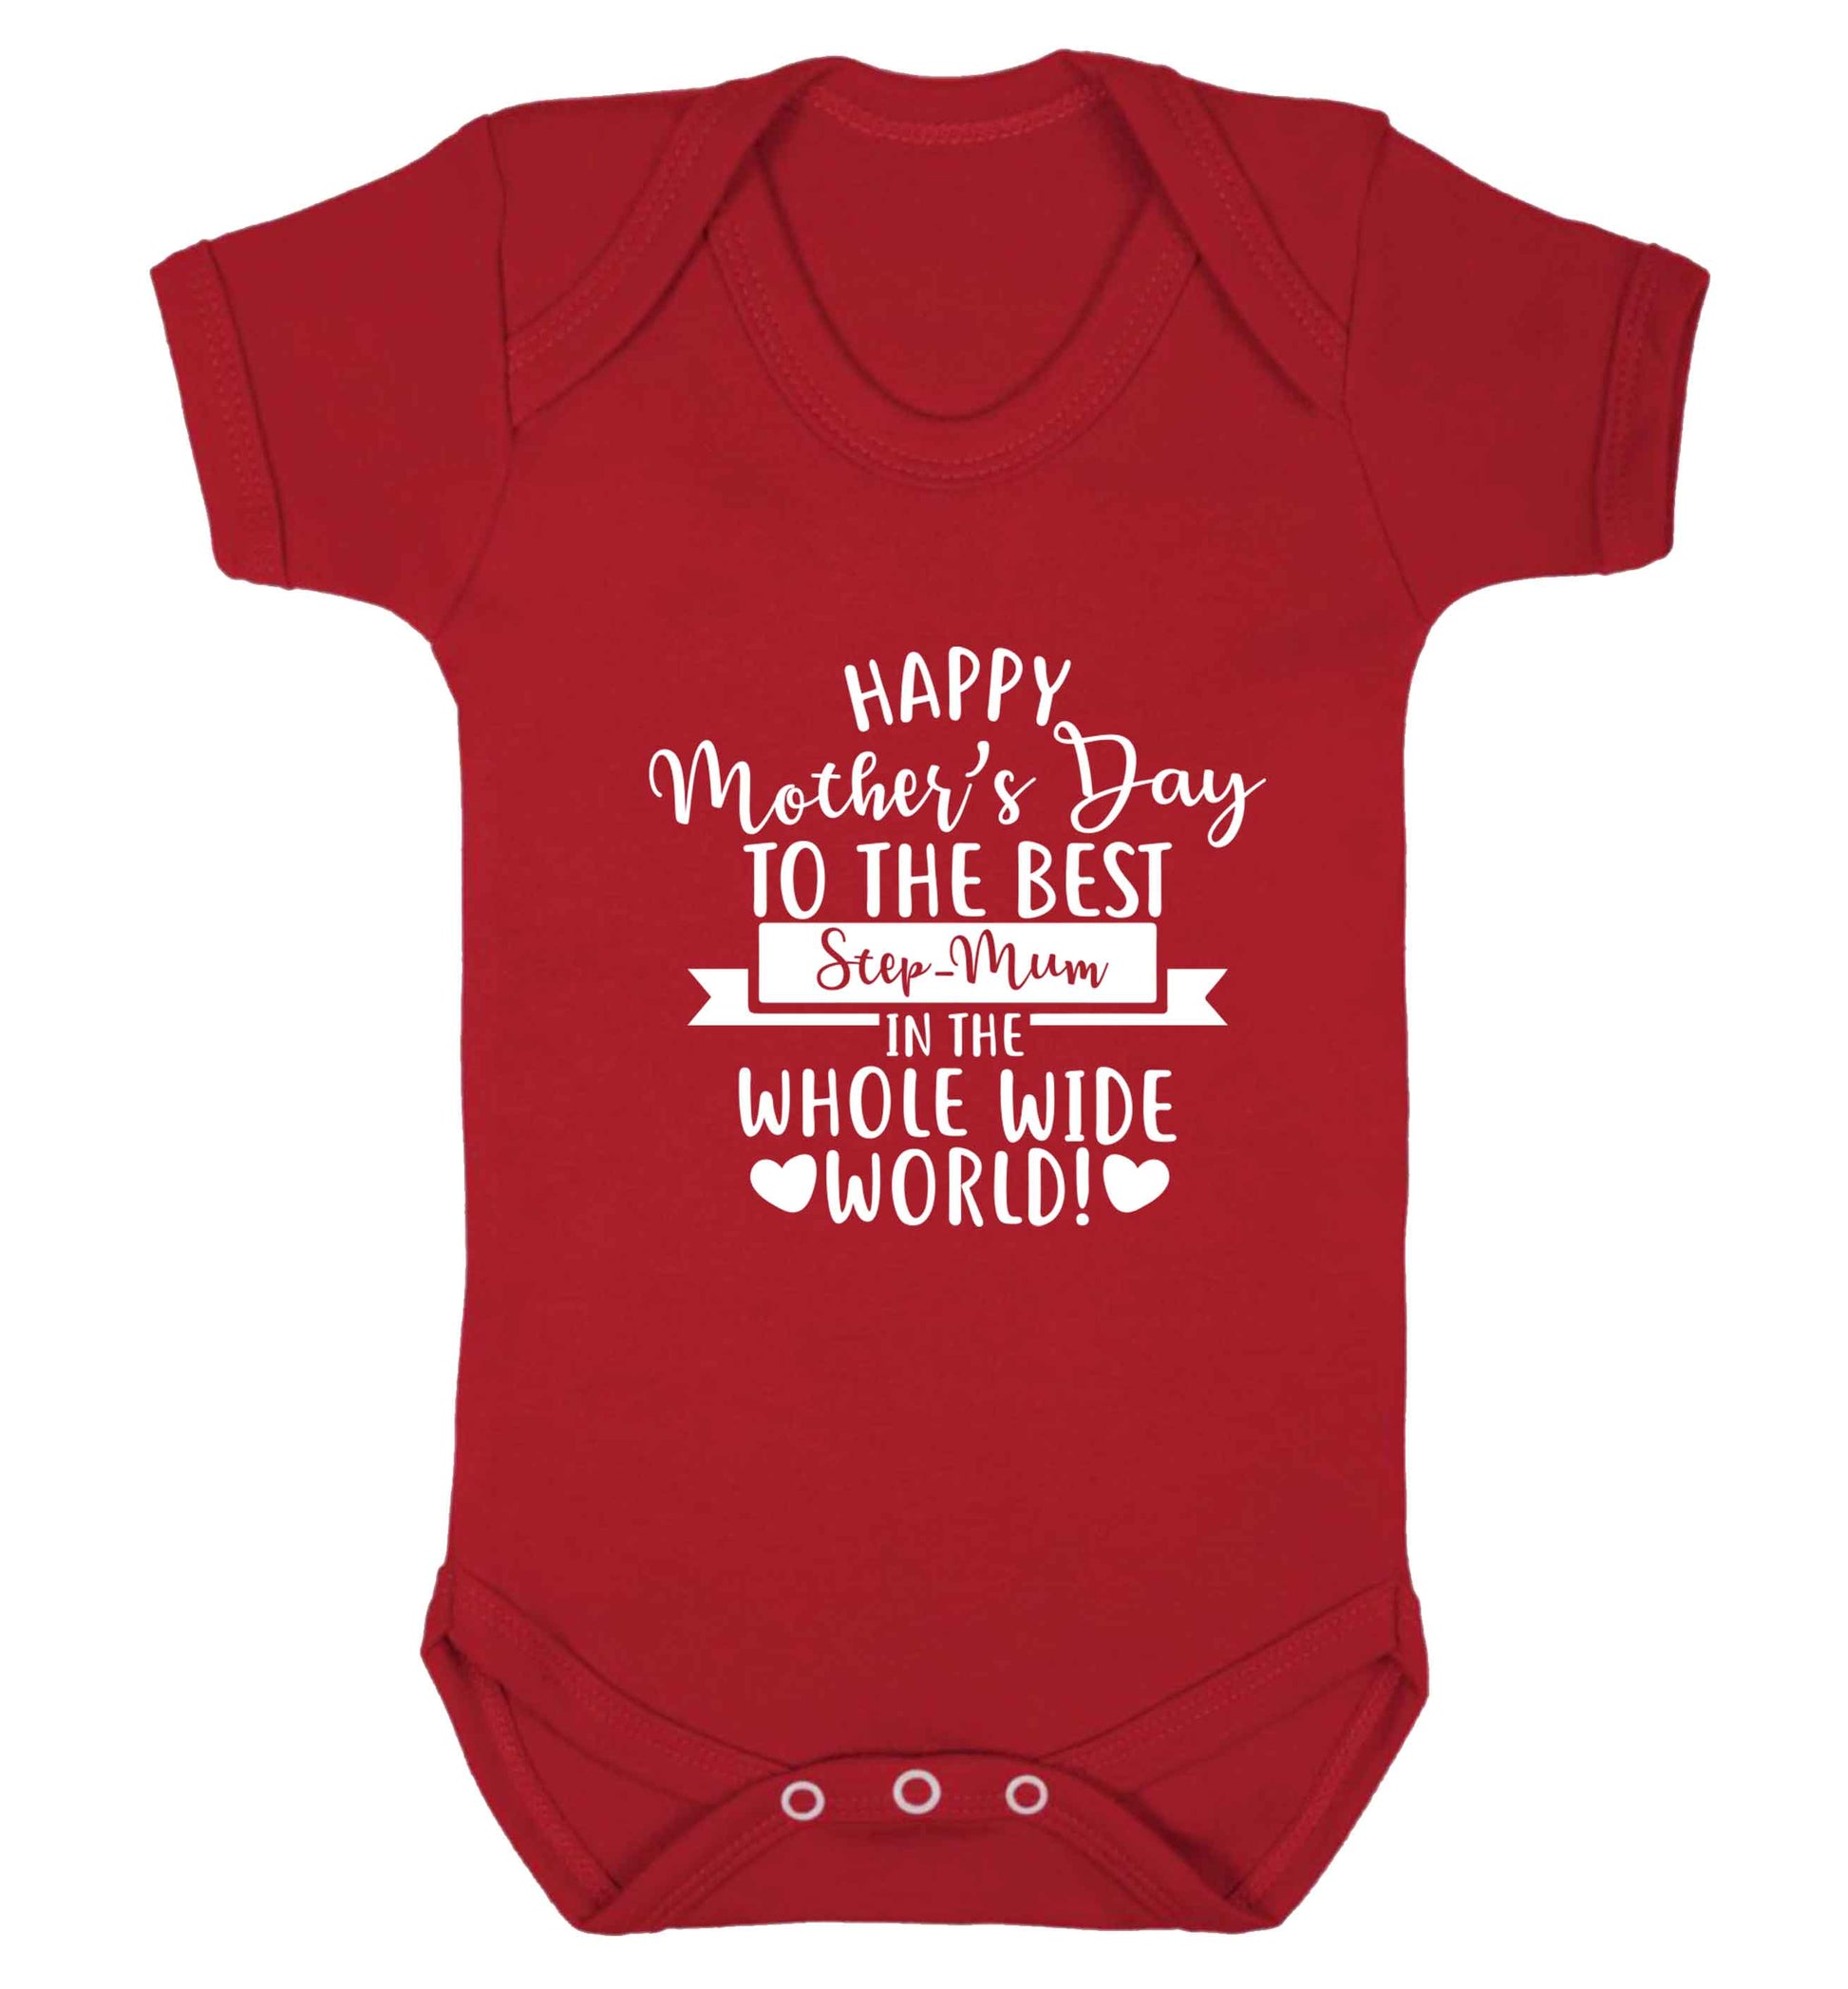 Happy mother's day to the best step-mum in the world baby vest red 18-24 months